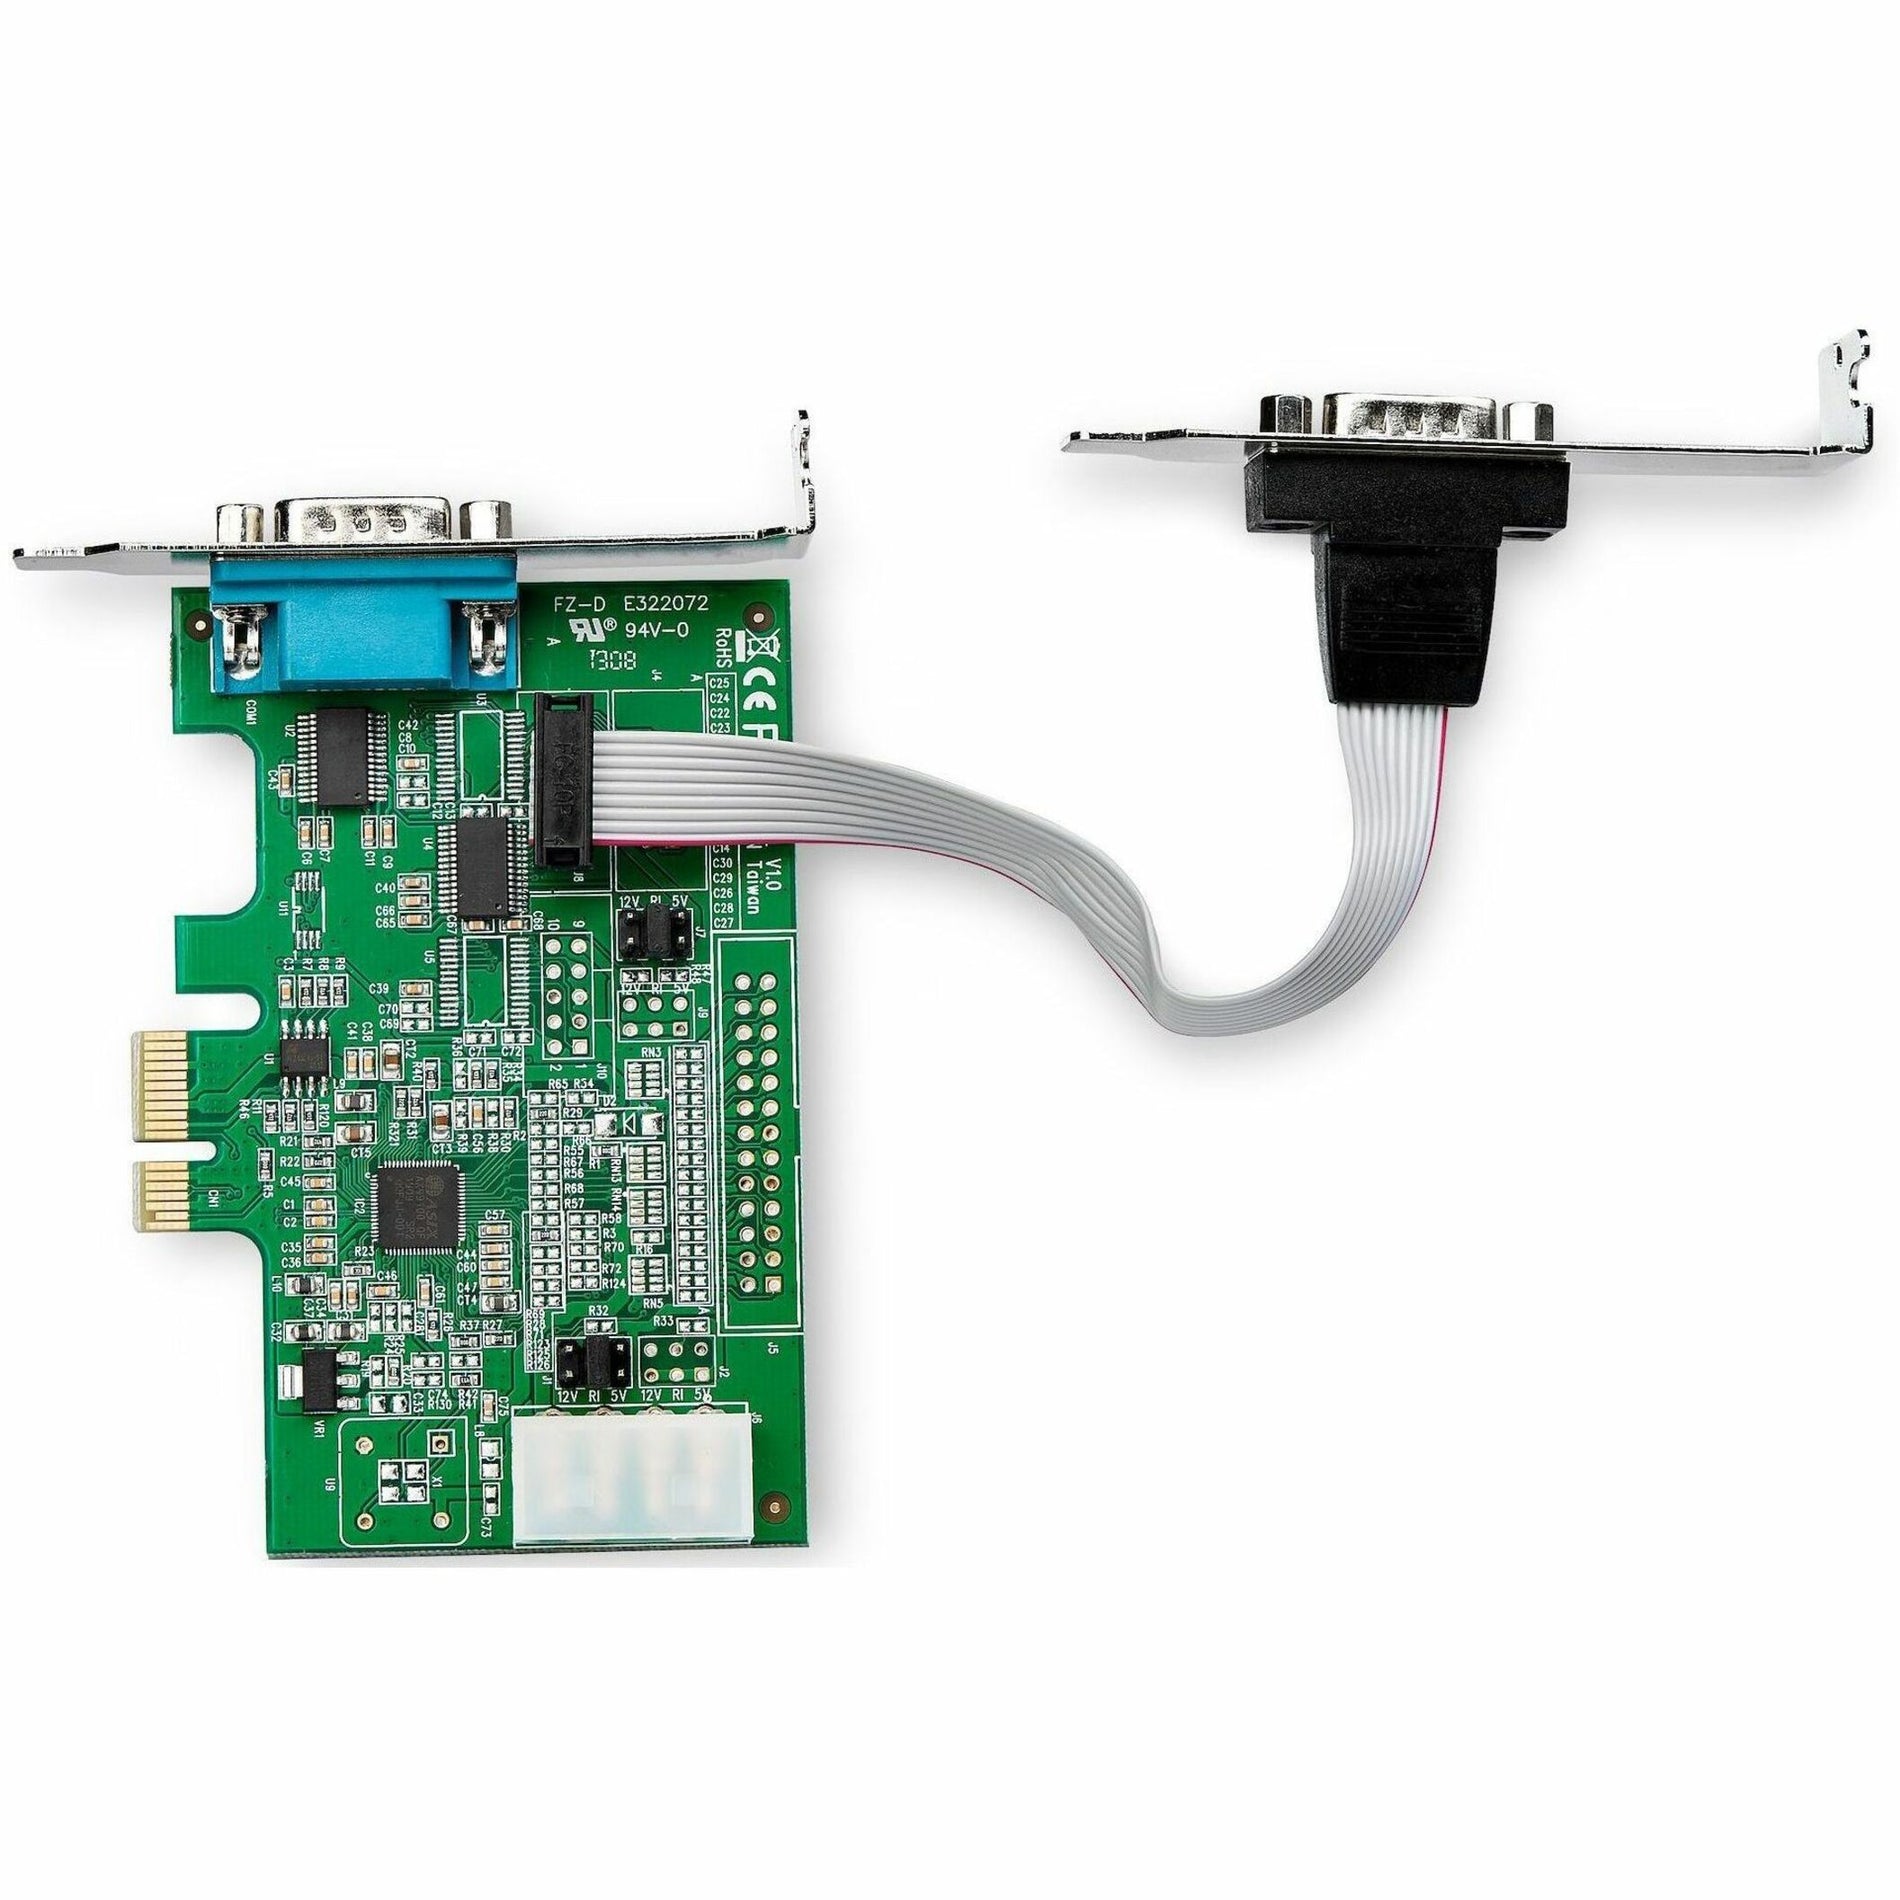 StarTech.com PEX2S953LP 2-Port RS232 Serial Adapter Card with 16950 UART, Low-profile, PCI Express